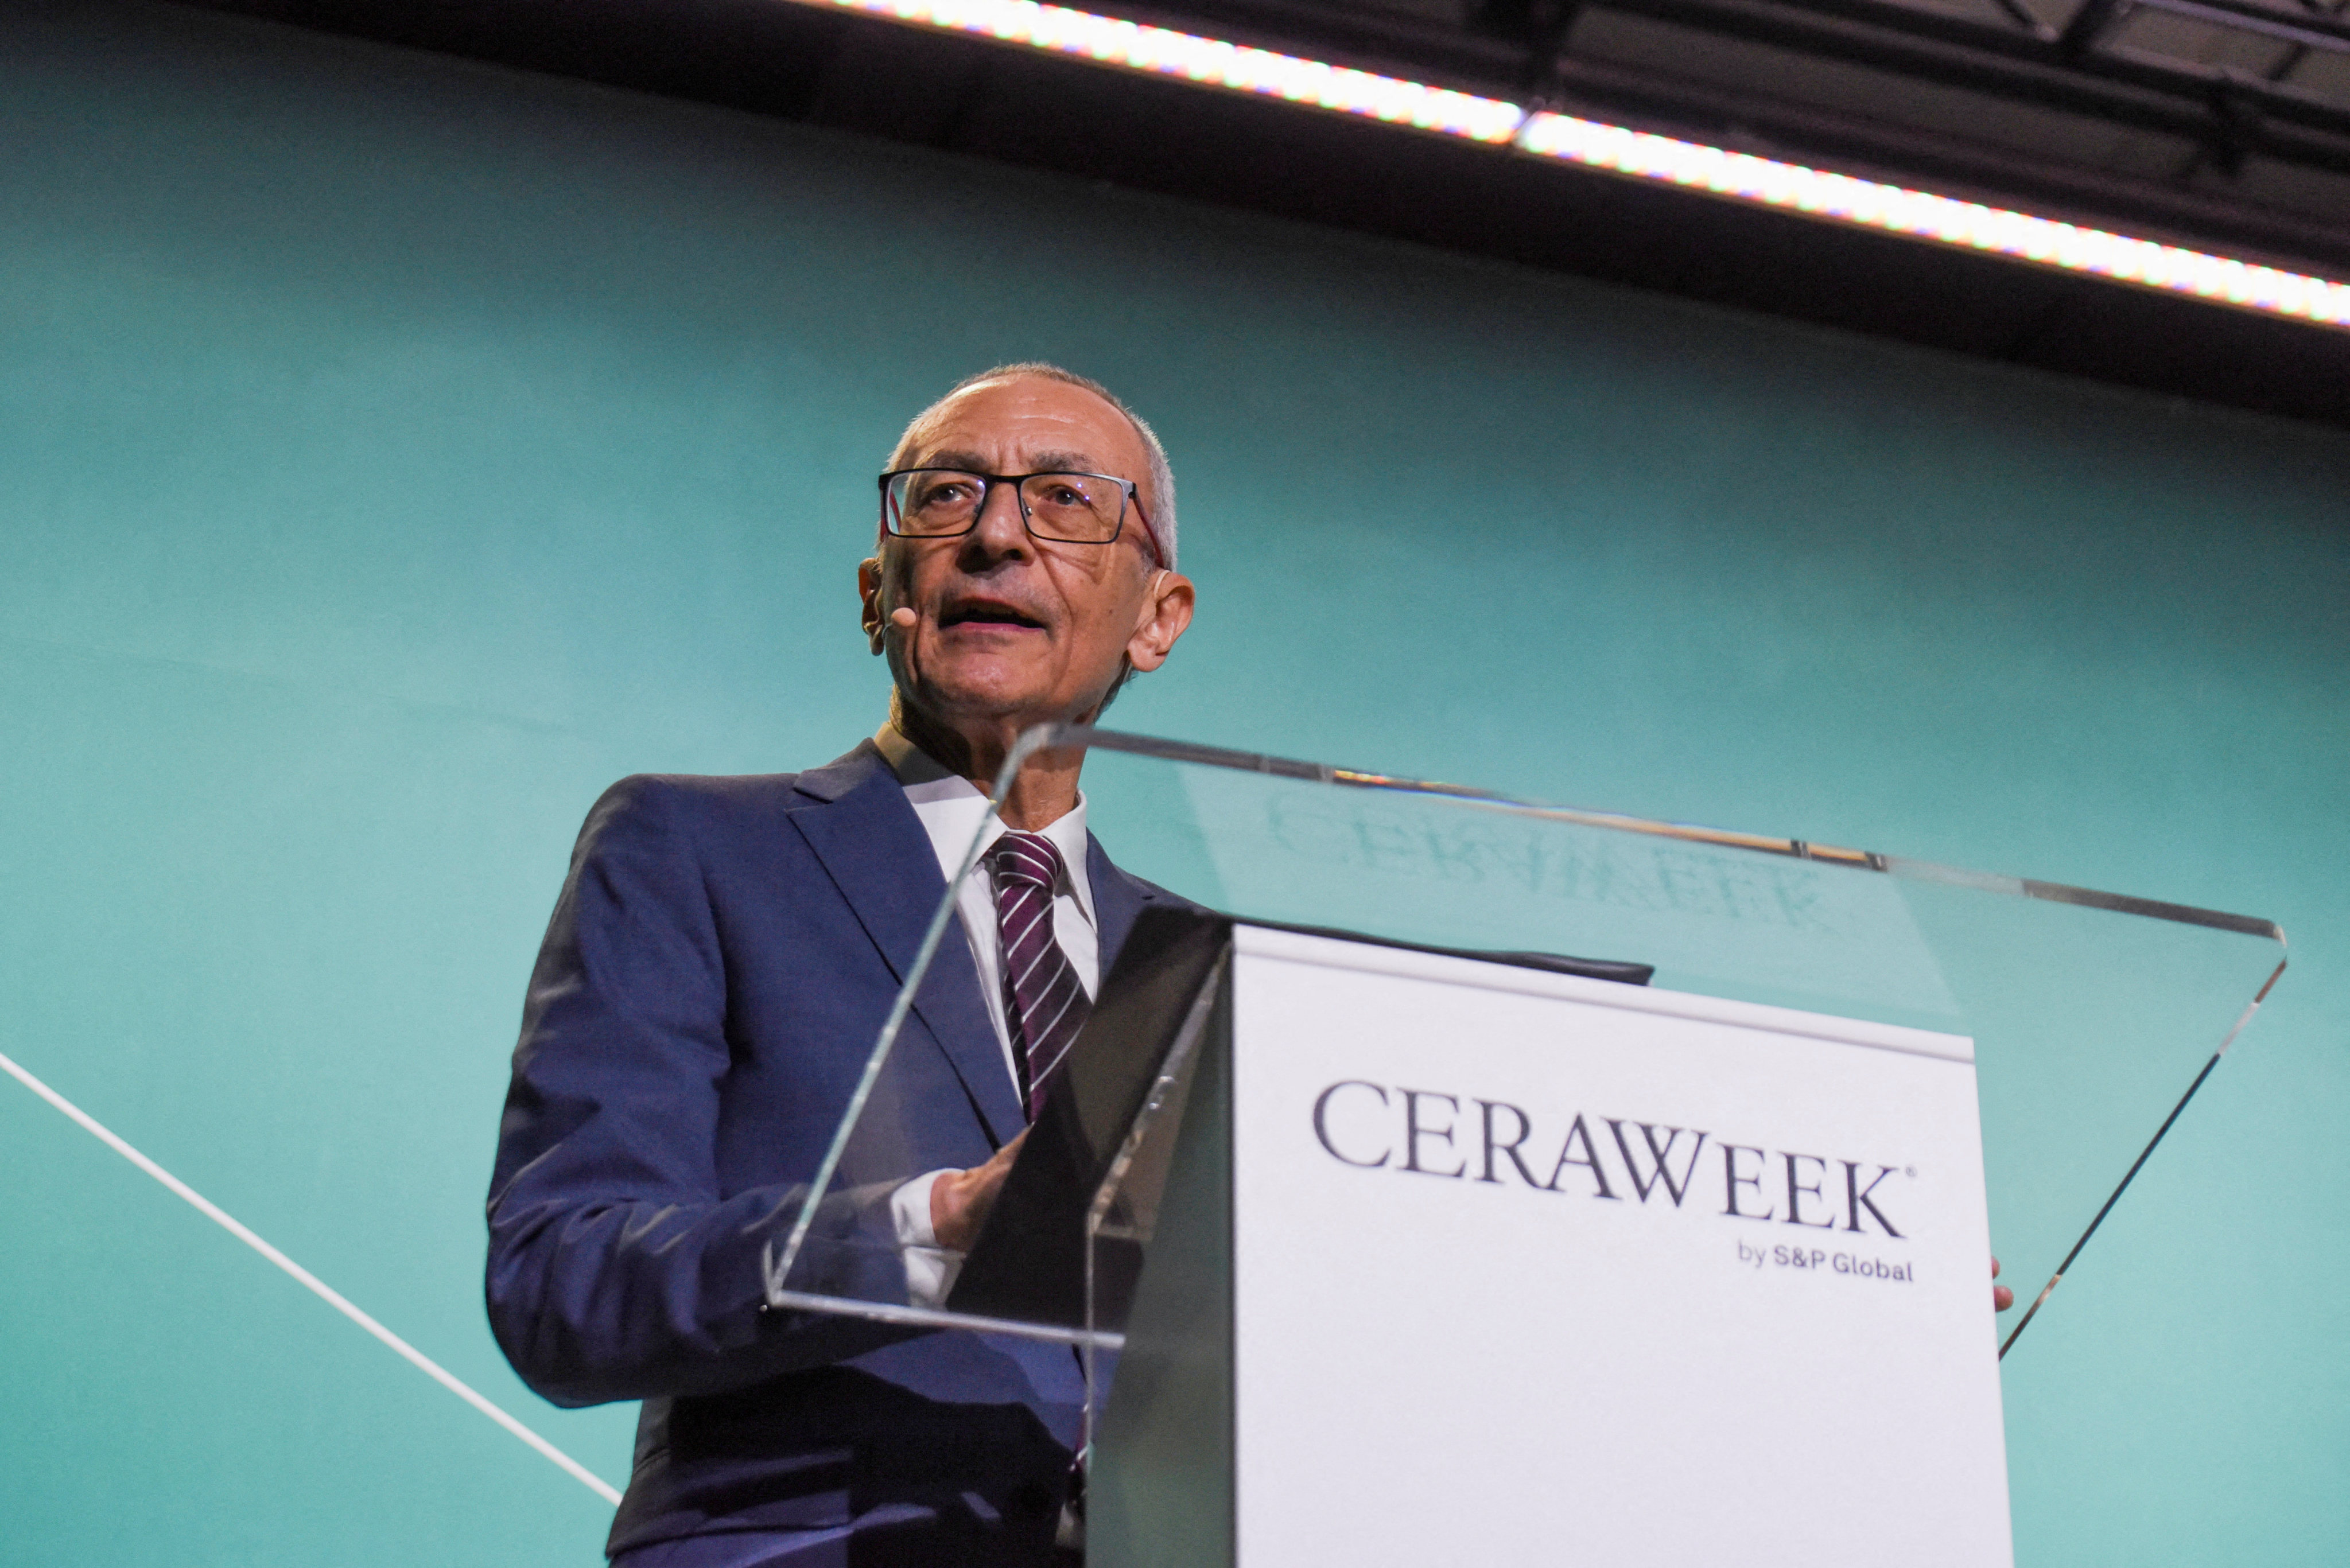 John Podesta, the White House senior adviser for clean energy, delivers a speech during the CERAWeek energy conference in Houston, Texas, in March 2023. Photo: Reuters